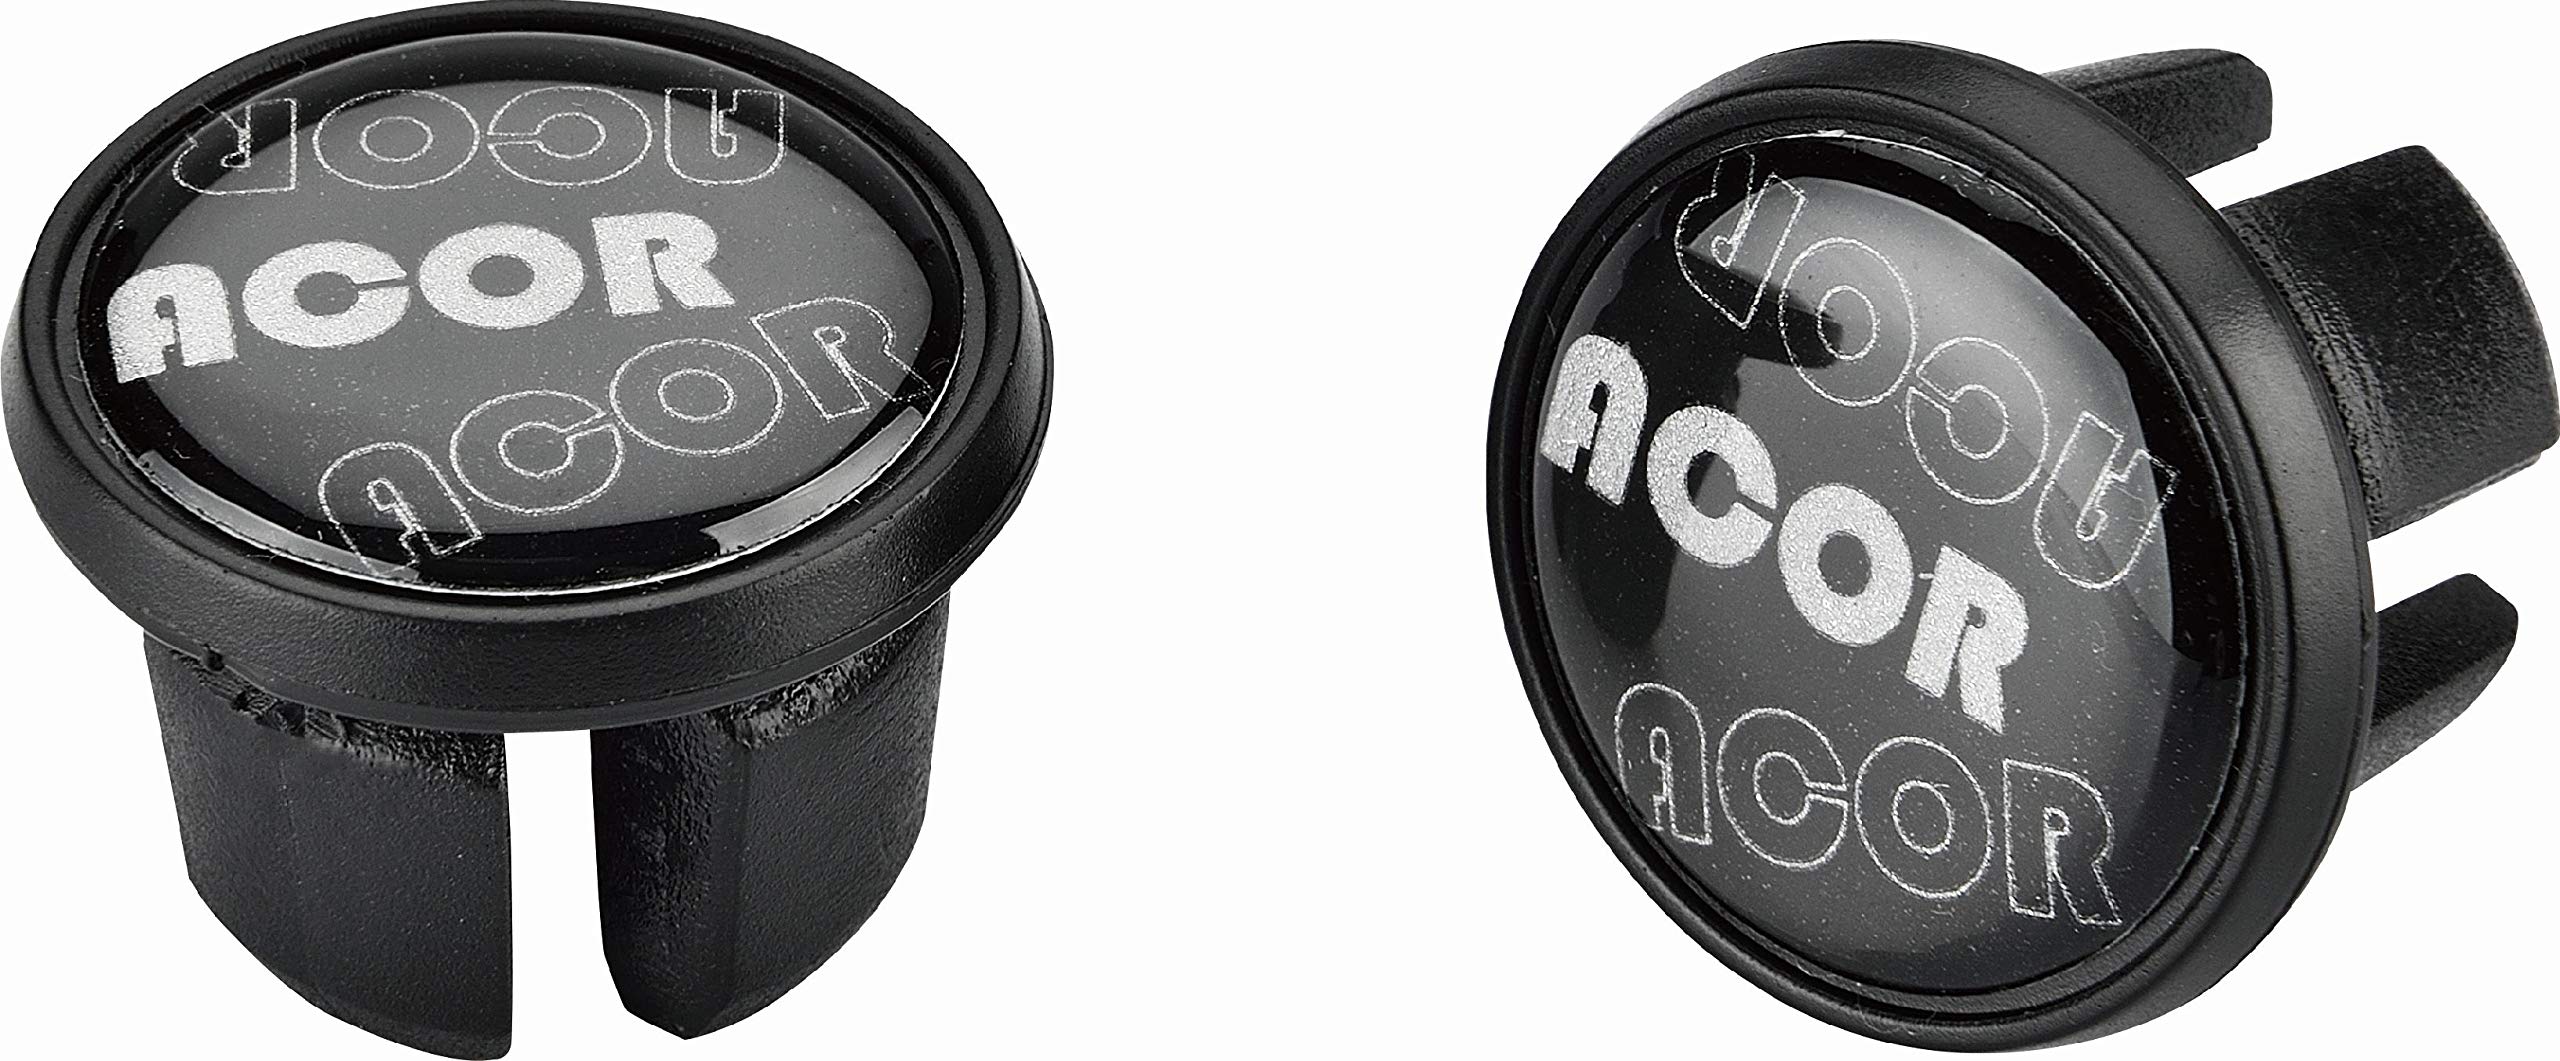 ASG21910 Acor Road Handlebar End Plugs With Reflective Logo